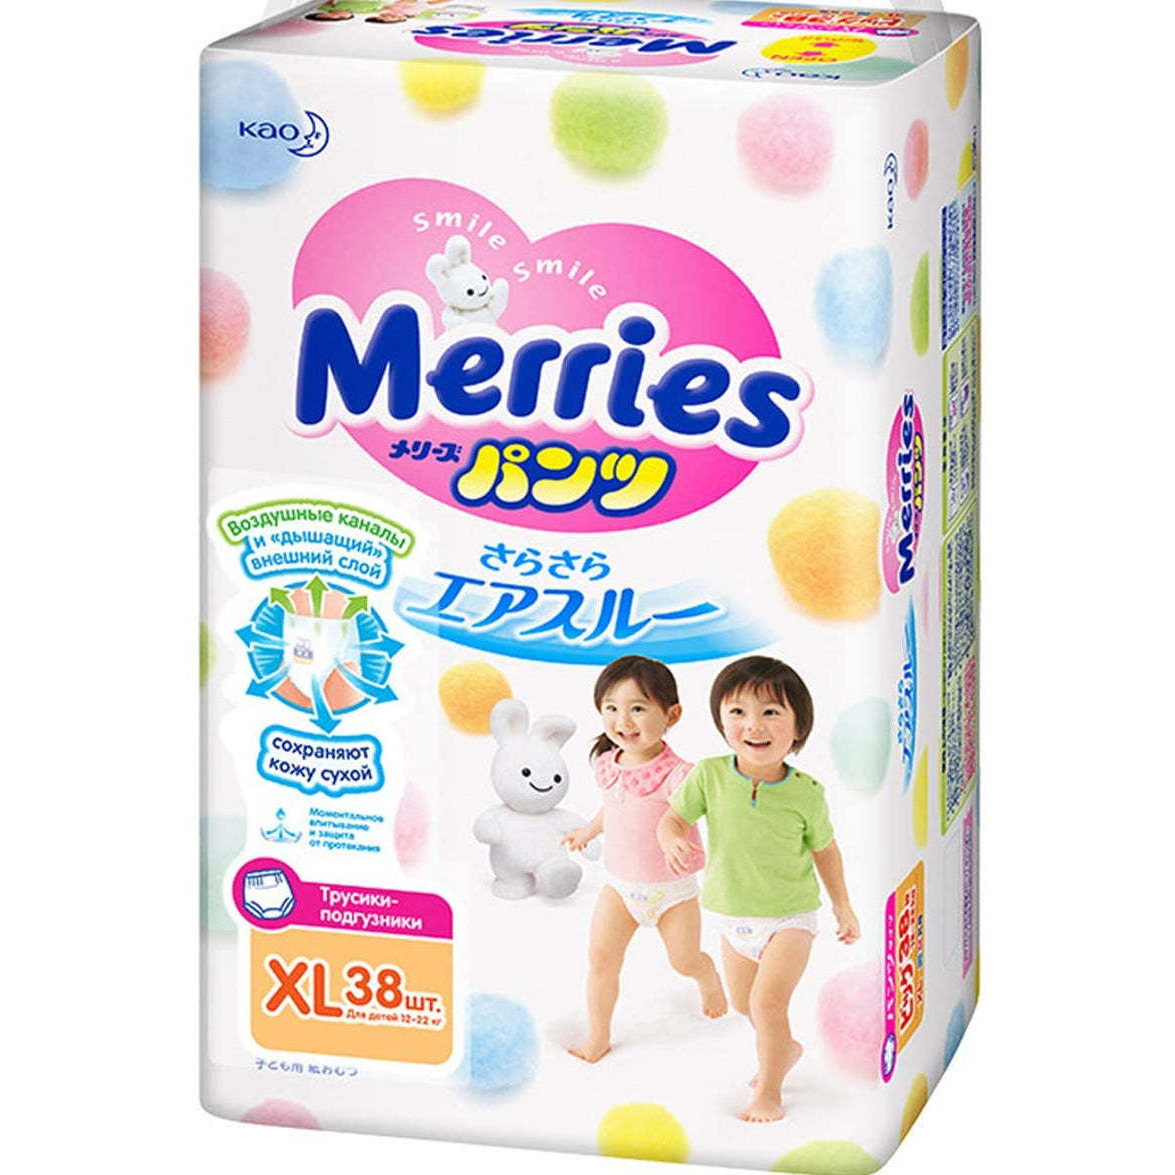 Kao Merries Pants Diapers (12~22kg), Size XL ,38 Count Made In Japan